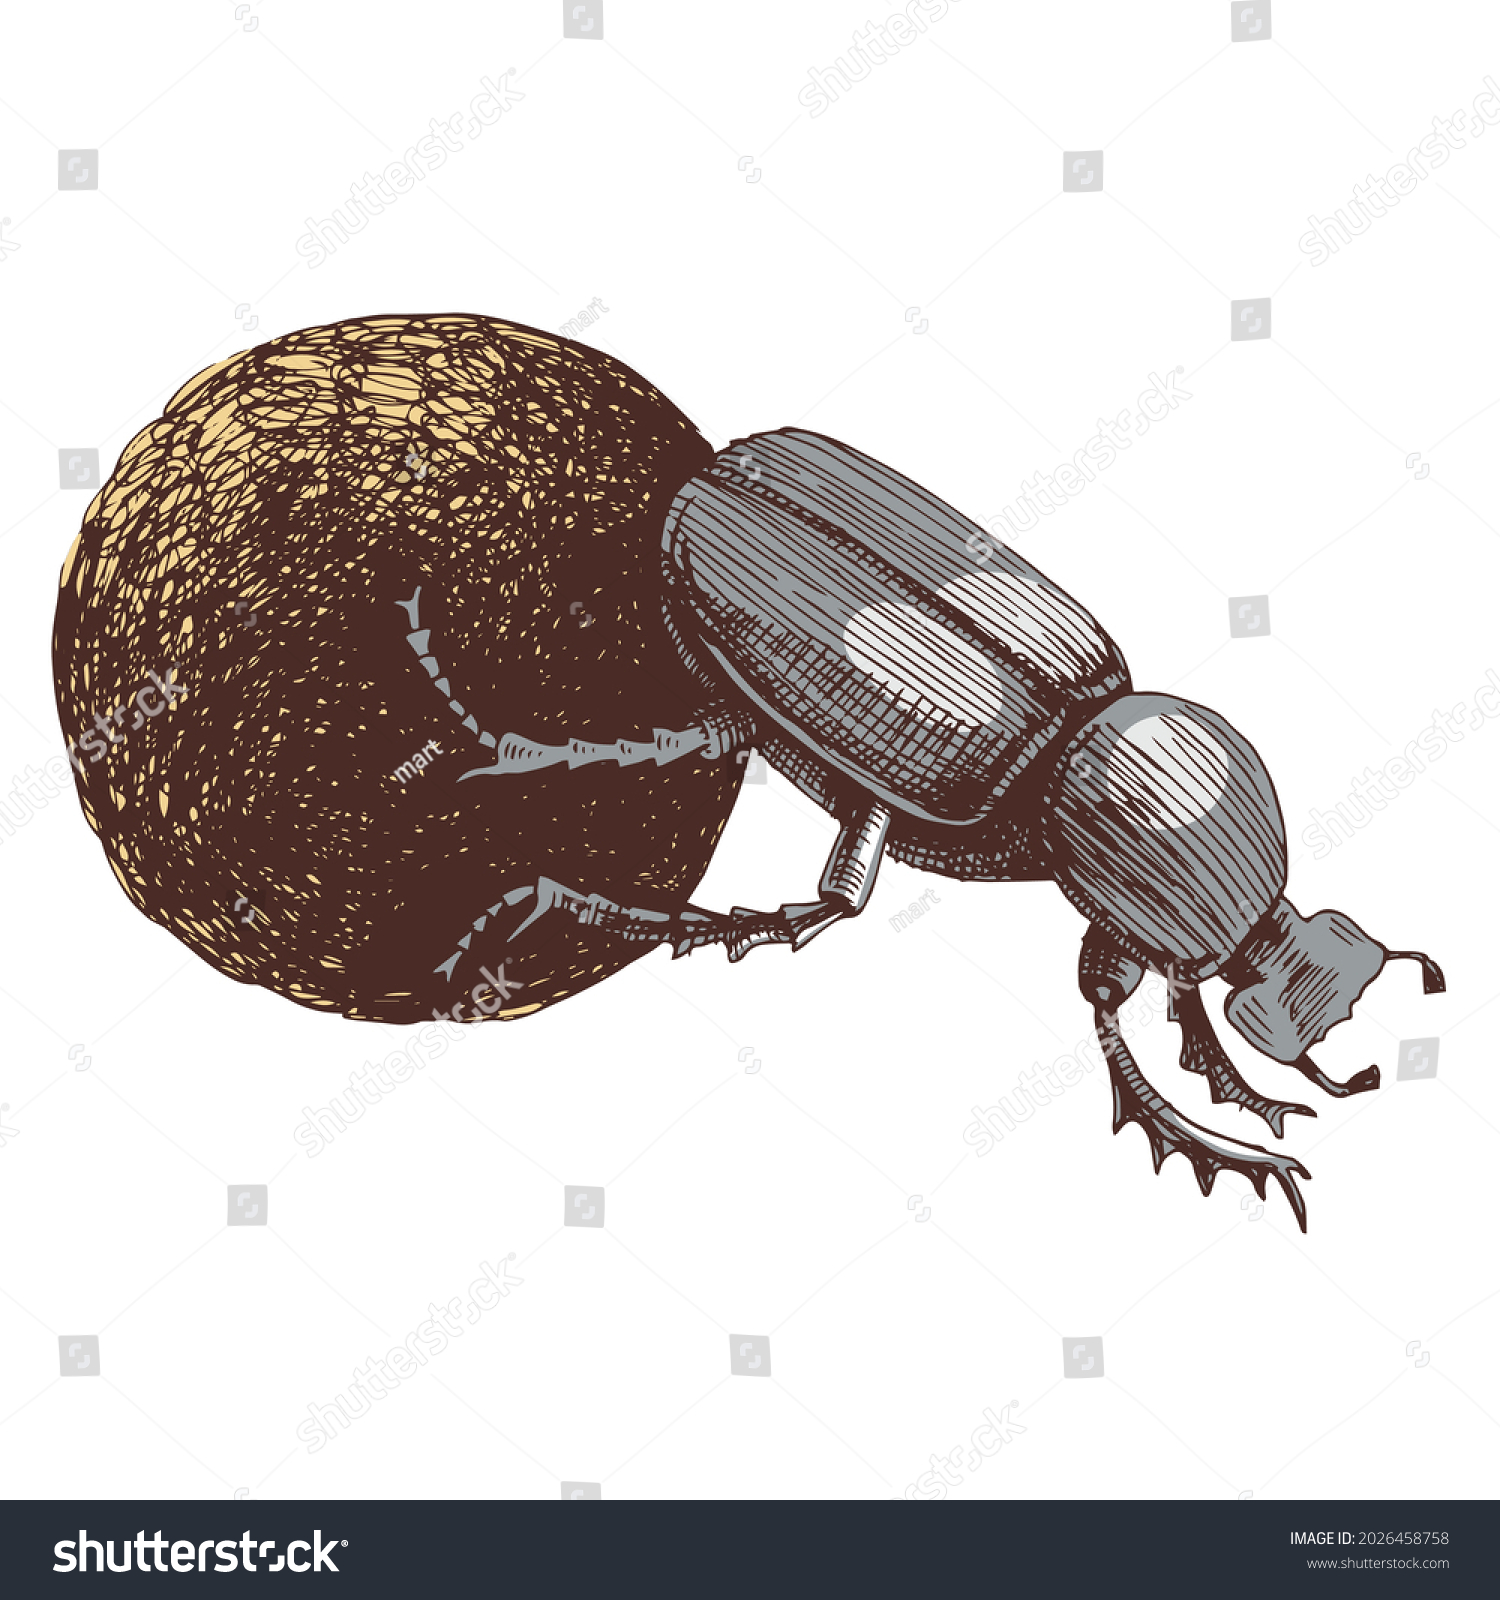 SVG of African Dung Beetle rolling ball svg